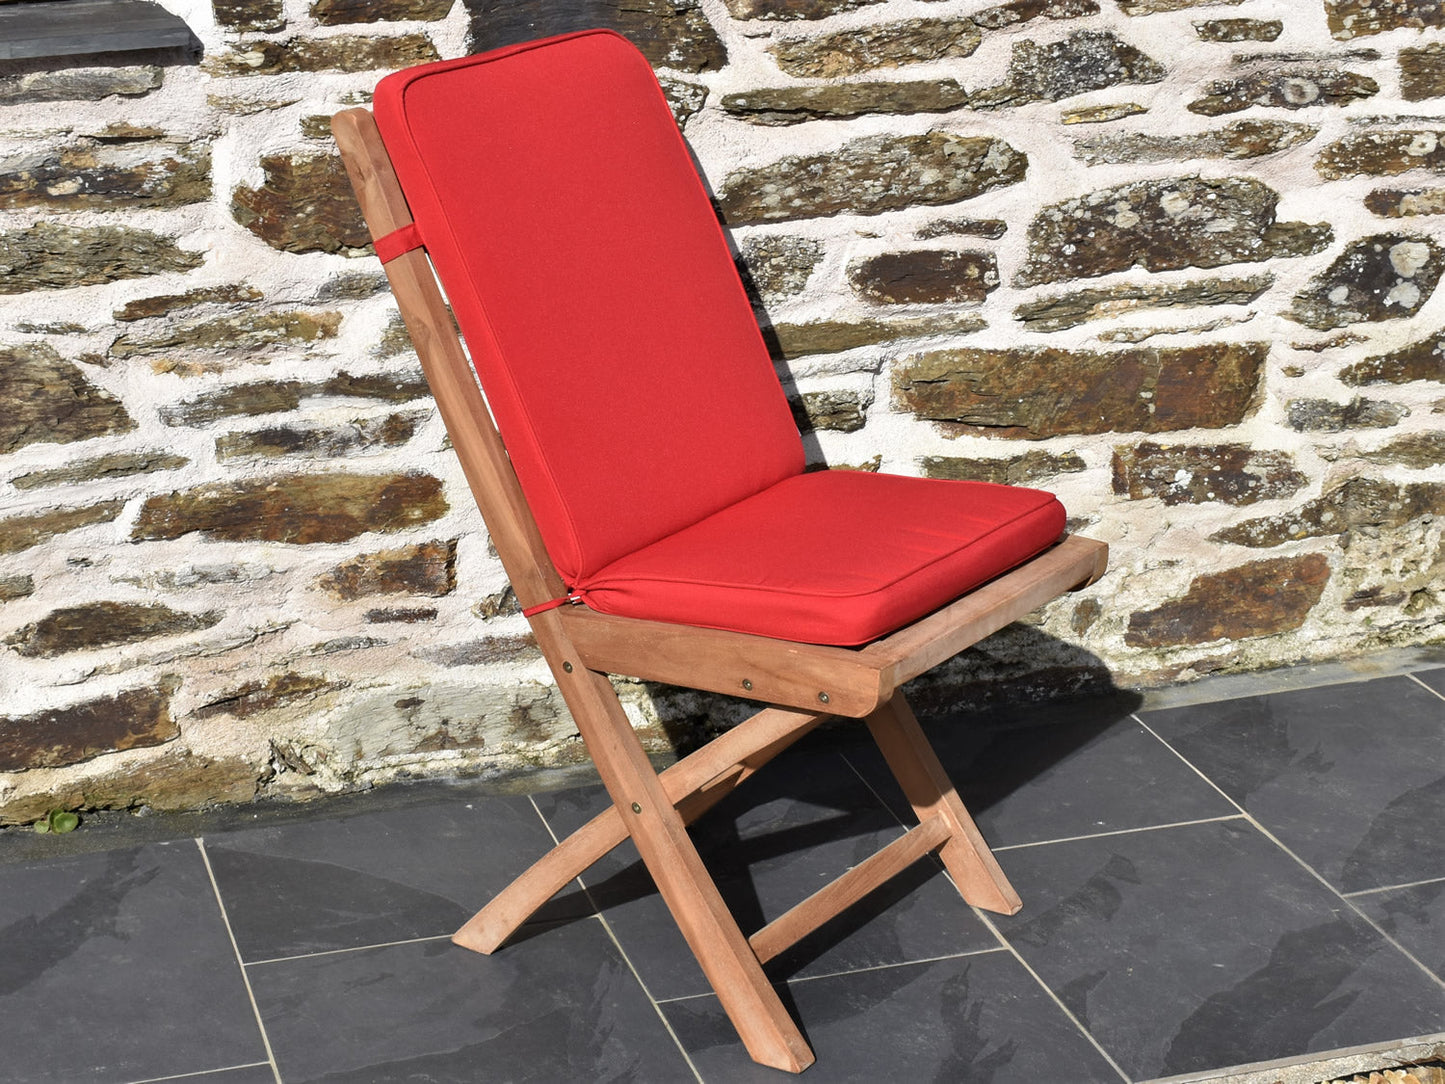 Classic bright red outdoor folding seat pad and back cushion, perfect for folding teak garden chairs